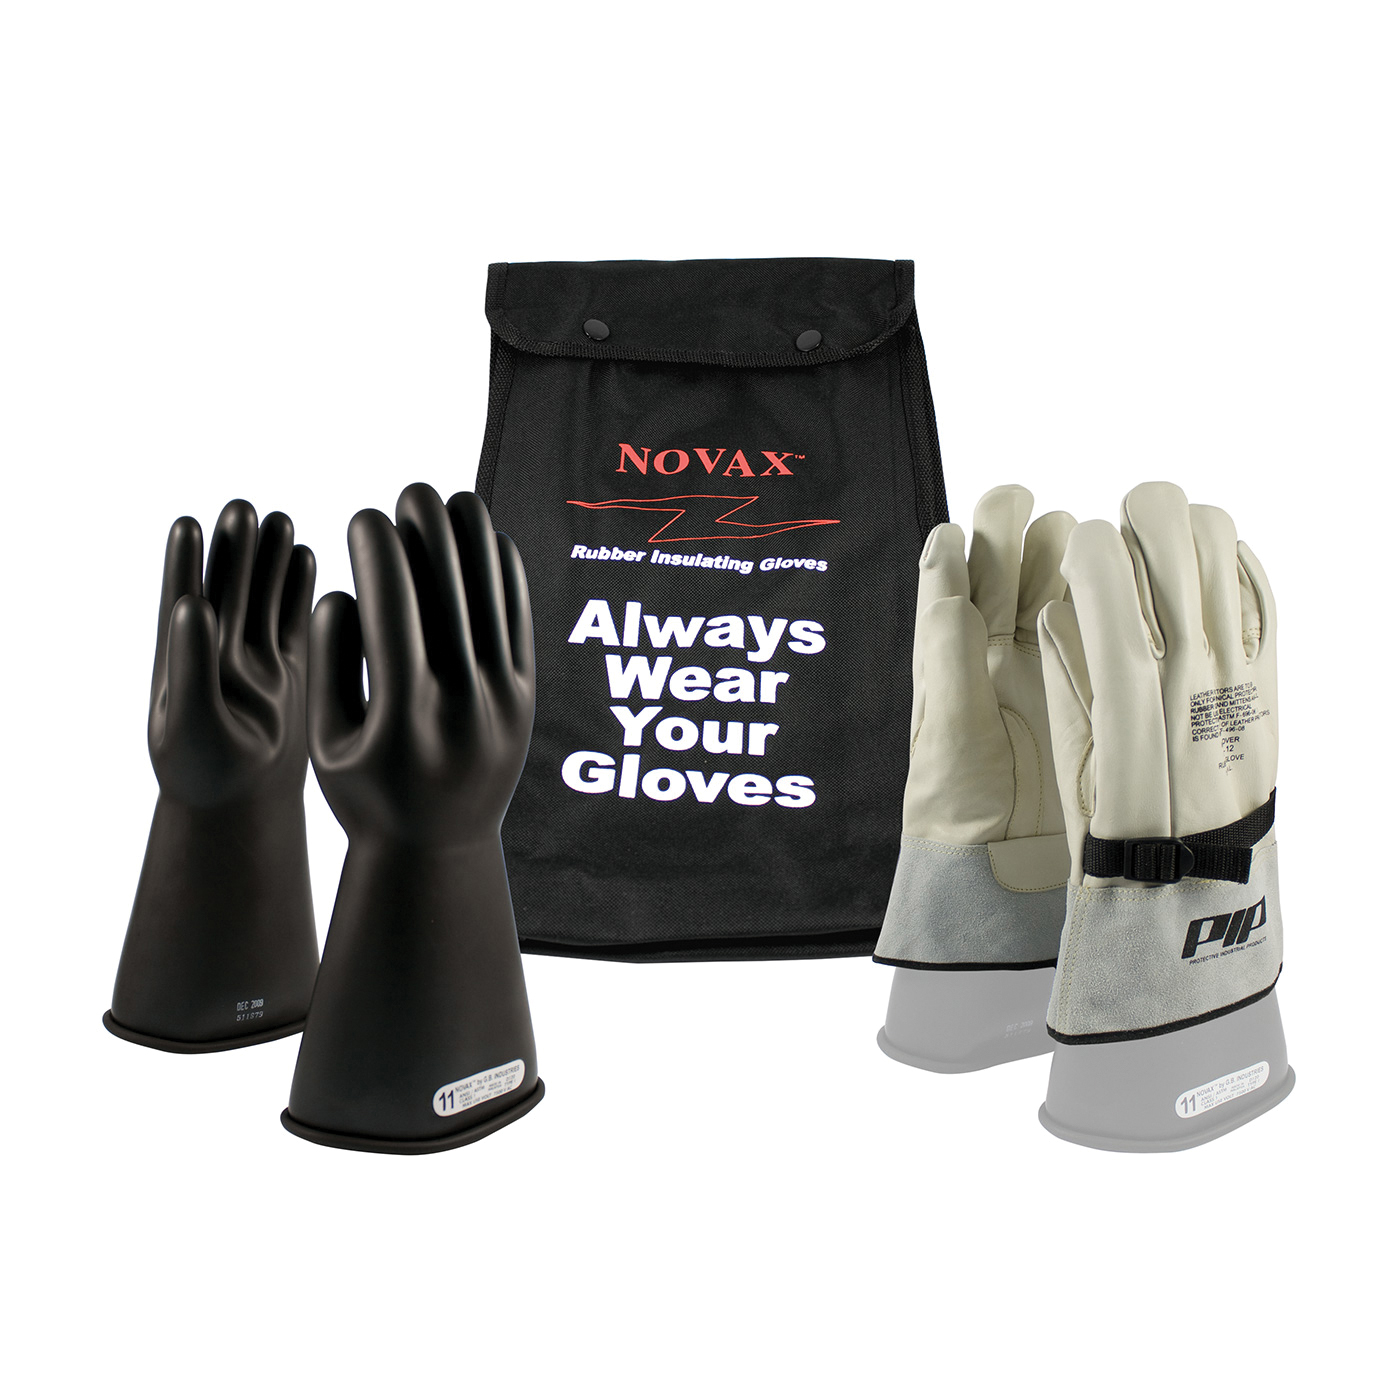 Novax® 150-SK-1/8-KIT Insulating Unisex Electrical Safety Gloves Kit, SZ 8, Cowhide Leather/Natural Rubber, Black/Natural, 14 in L, ASTM Class: Class 1, 7500 VAC, 11250 VDC Max Use Voltage